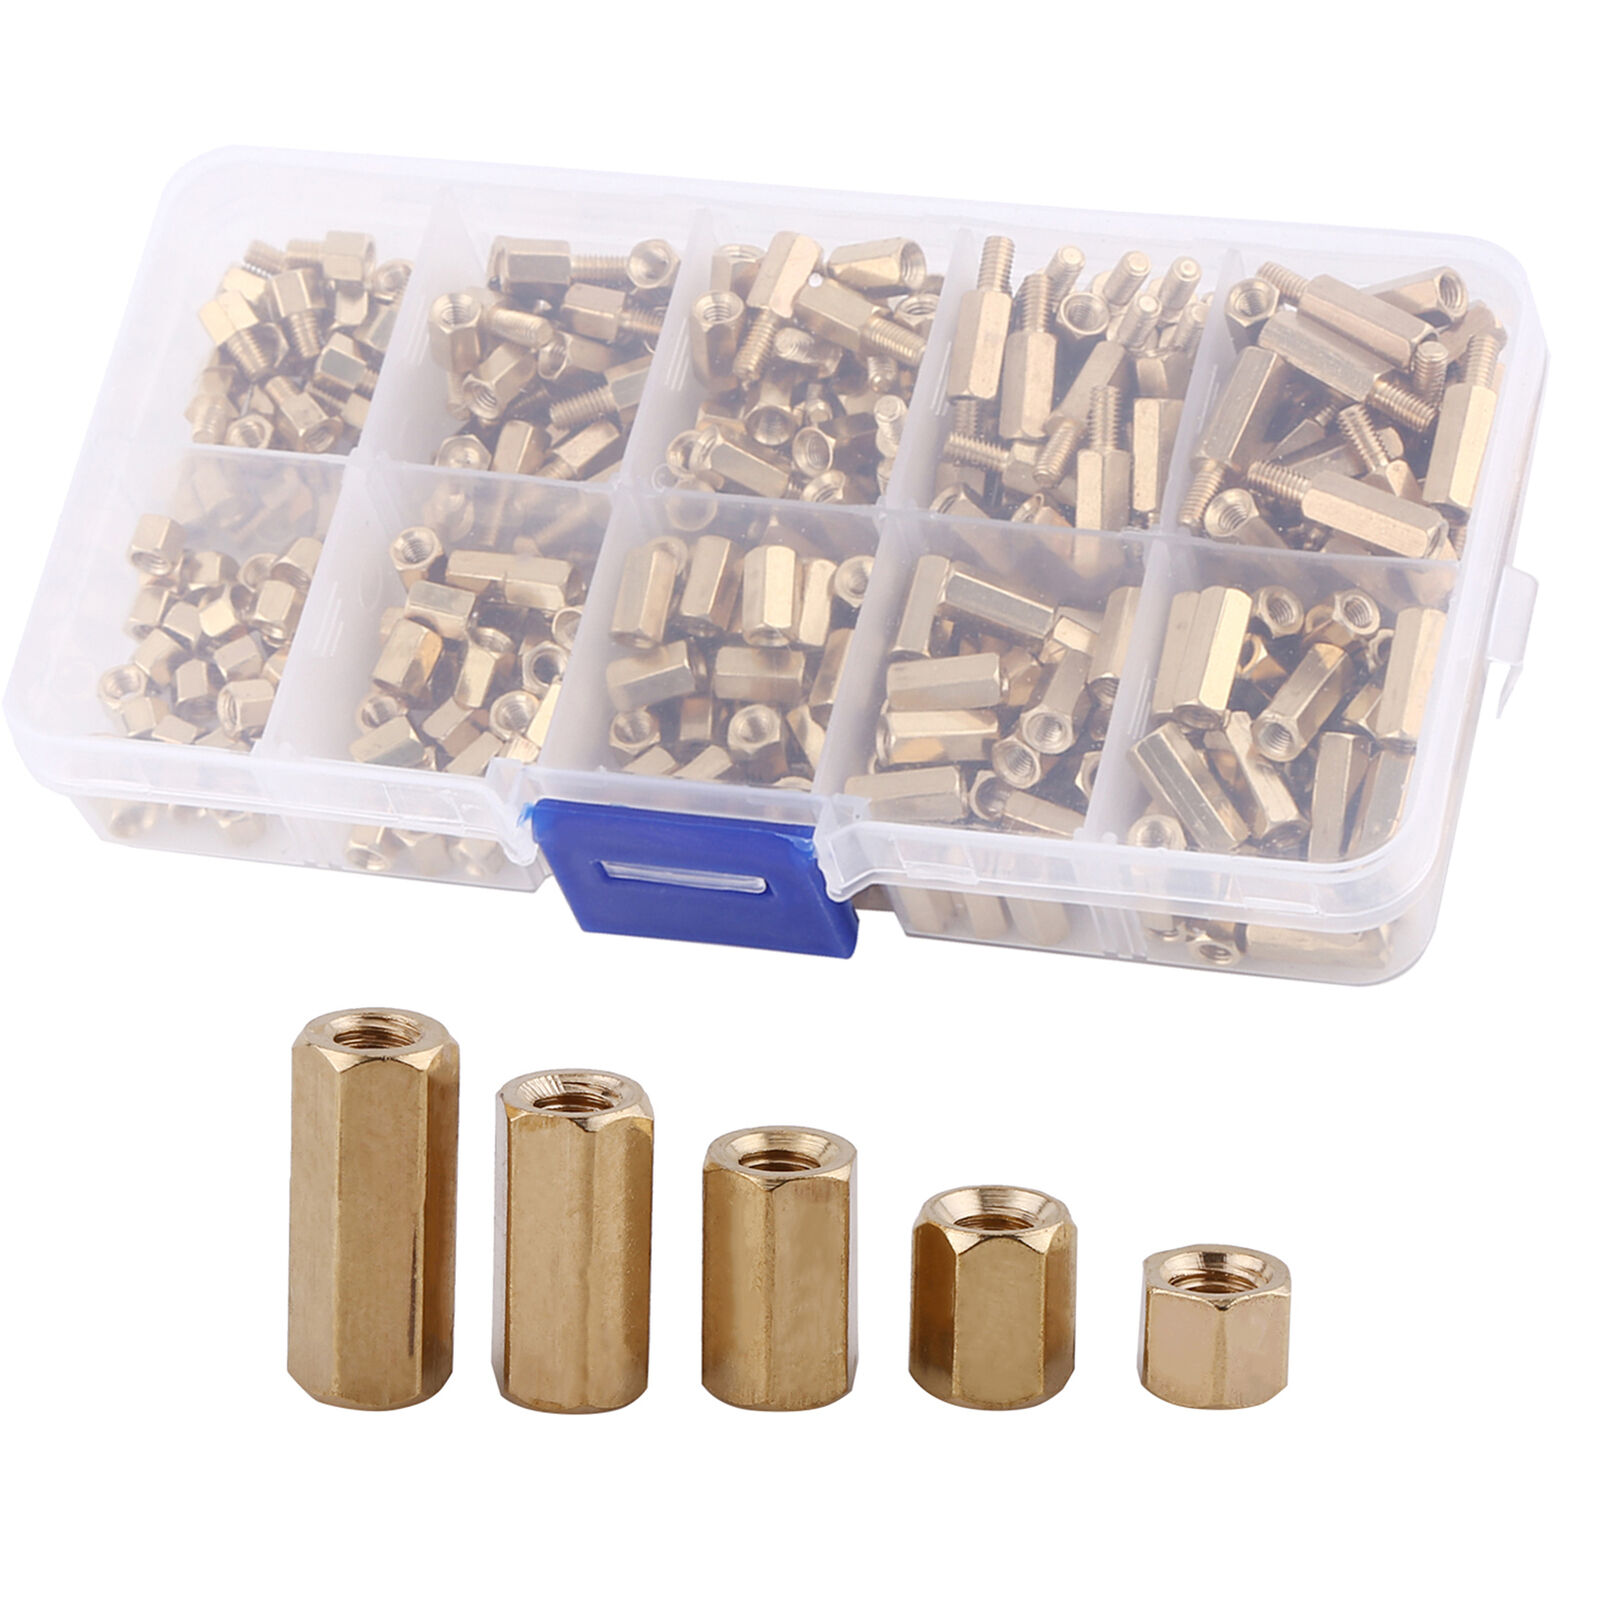 300pcs M3 Brass Standoffs Hex Male Female Stand Off DIY Set For Motherboard